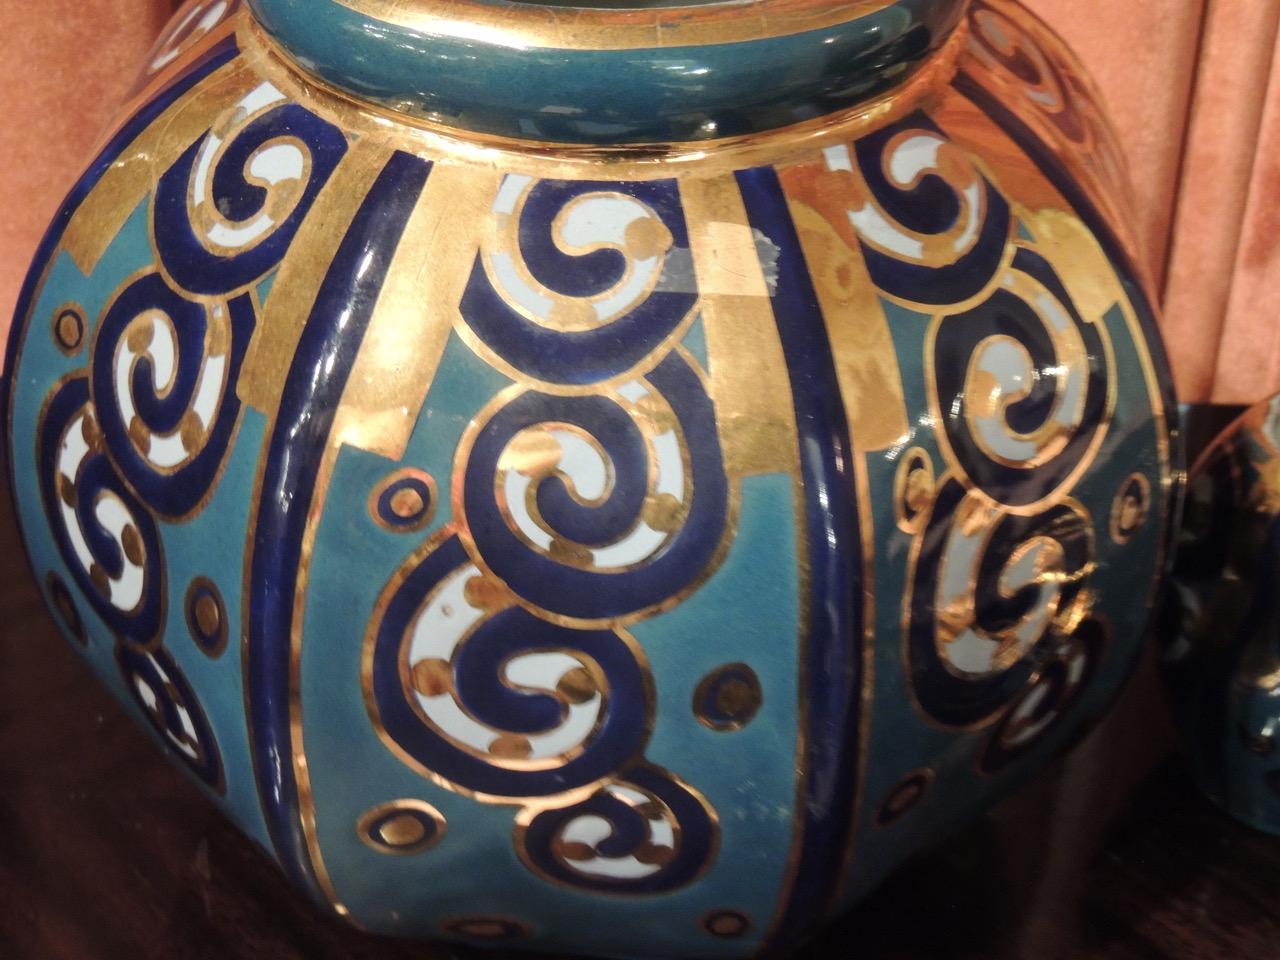 Art Deco Ceramics from Cerabelga of Belgium with an interplay of gilding and stylized scrolls in turquoise and cobalt blue glazing. Cerabelga produced these pieces in the late 1920s, contributing to the legacy of Belgian pottery that was the epitome